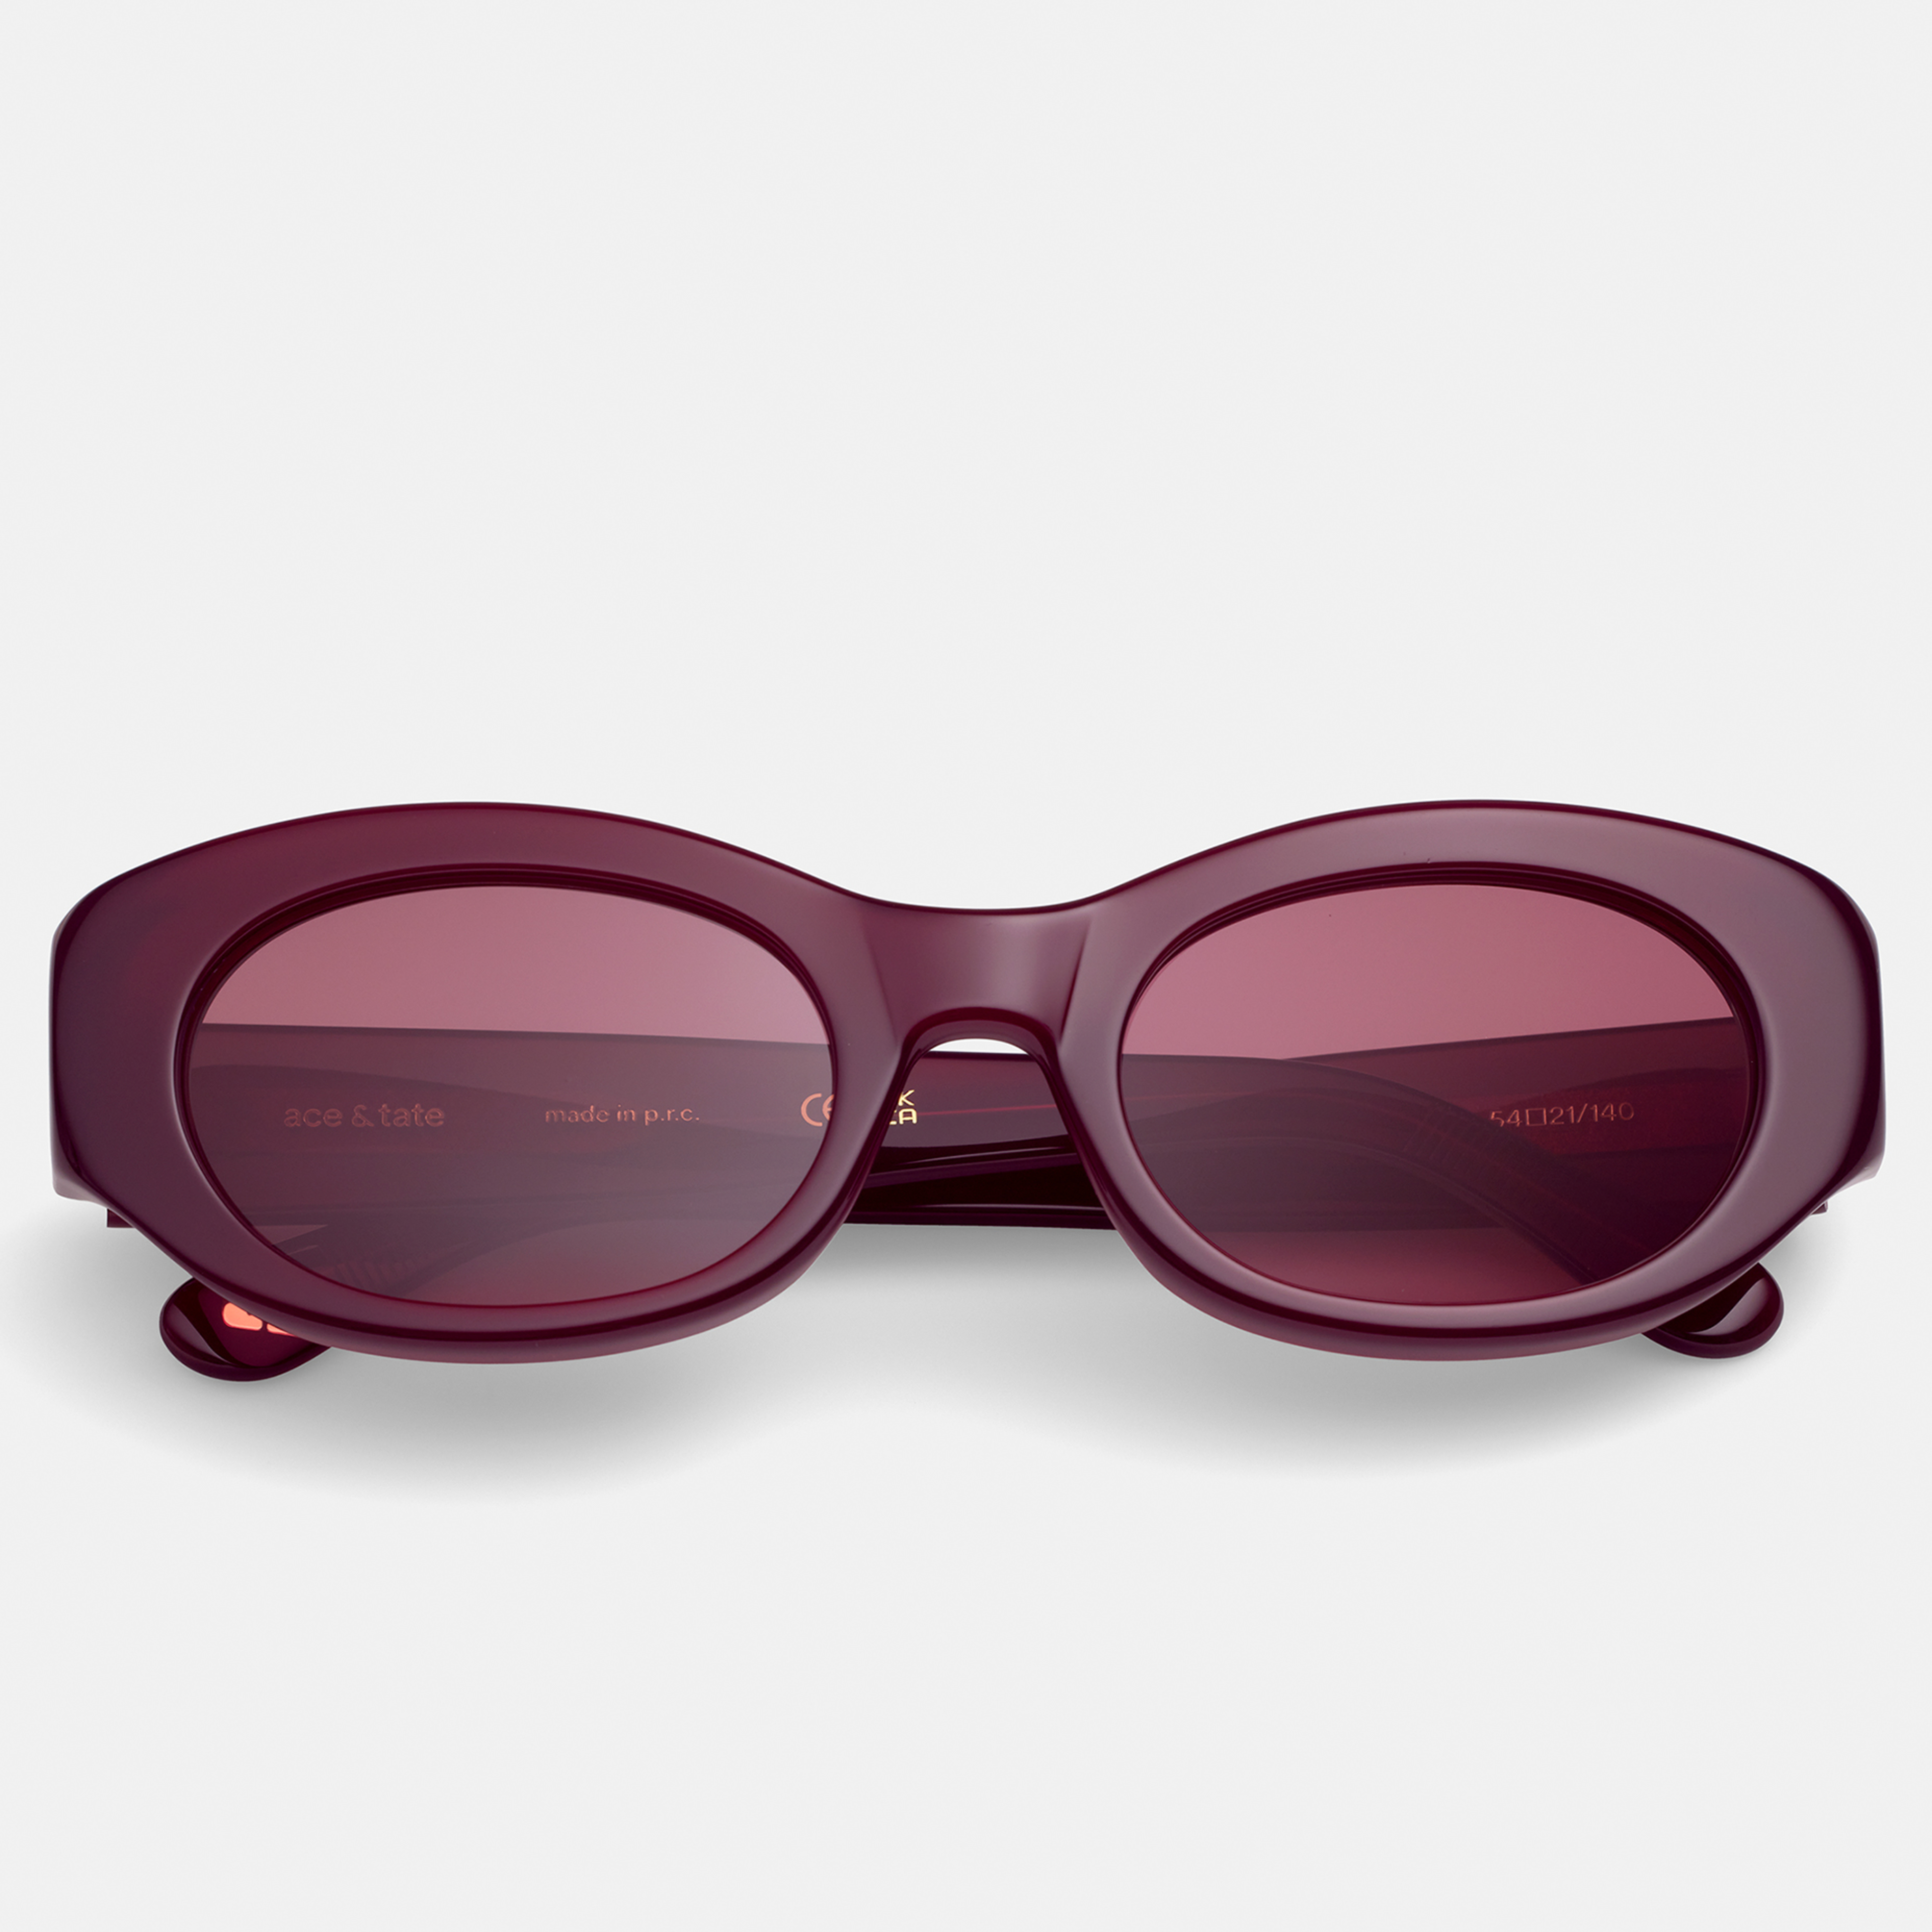 Ace & Tate Solaires | oval Renew bio-acétate in Rouge